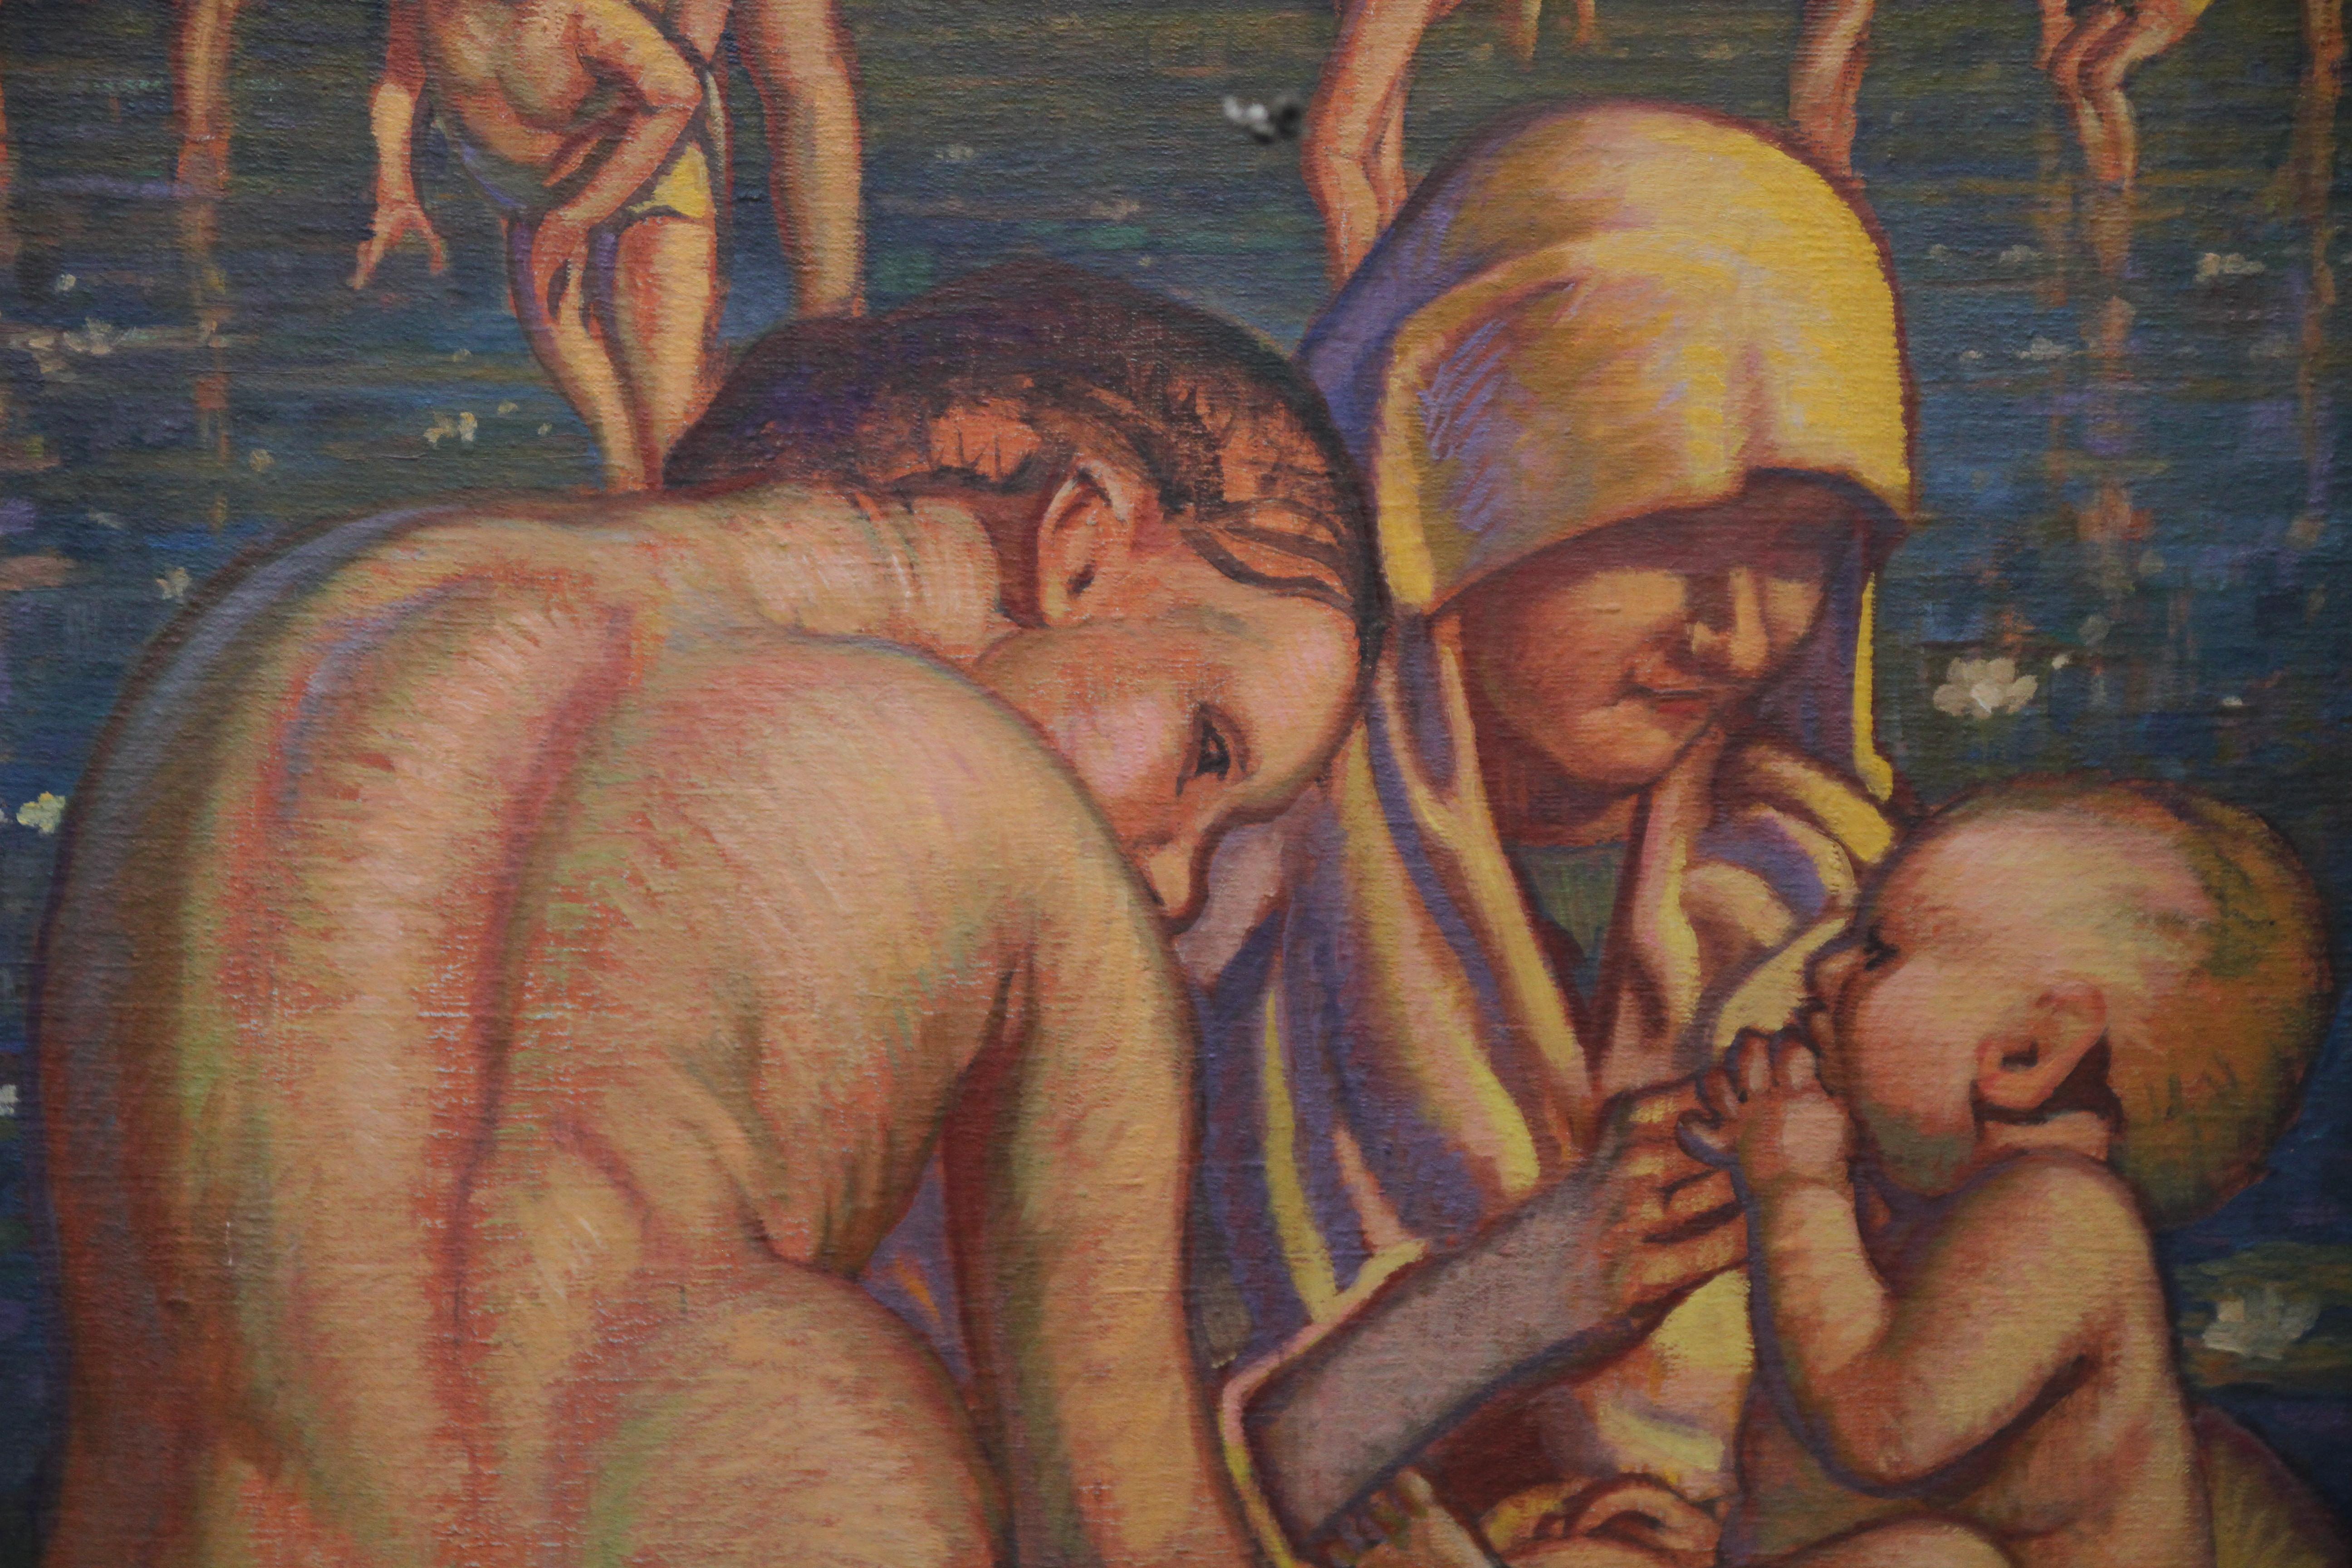 An intriguing 1930's Art Deco Slade School oil on canvas painting. The work depicts a mother and child bathing, surrounded by other bathers. It possibly has religious overtones. This interesting inter war painting, similar in many ways to the